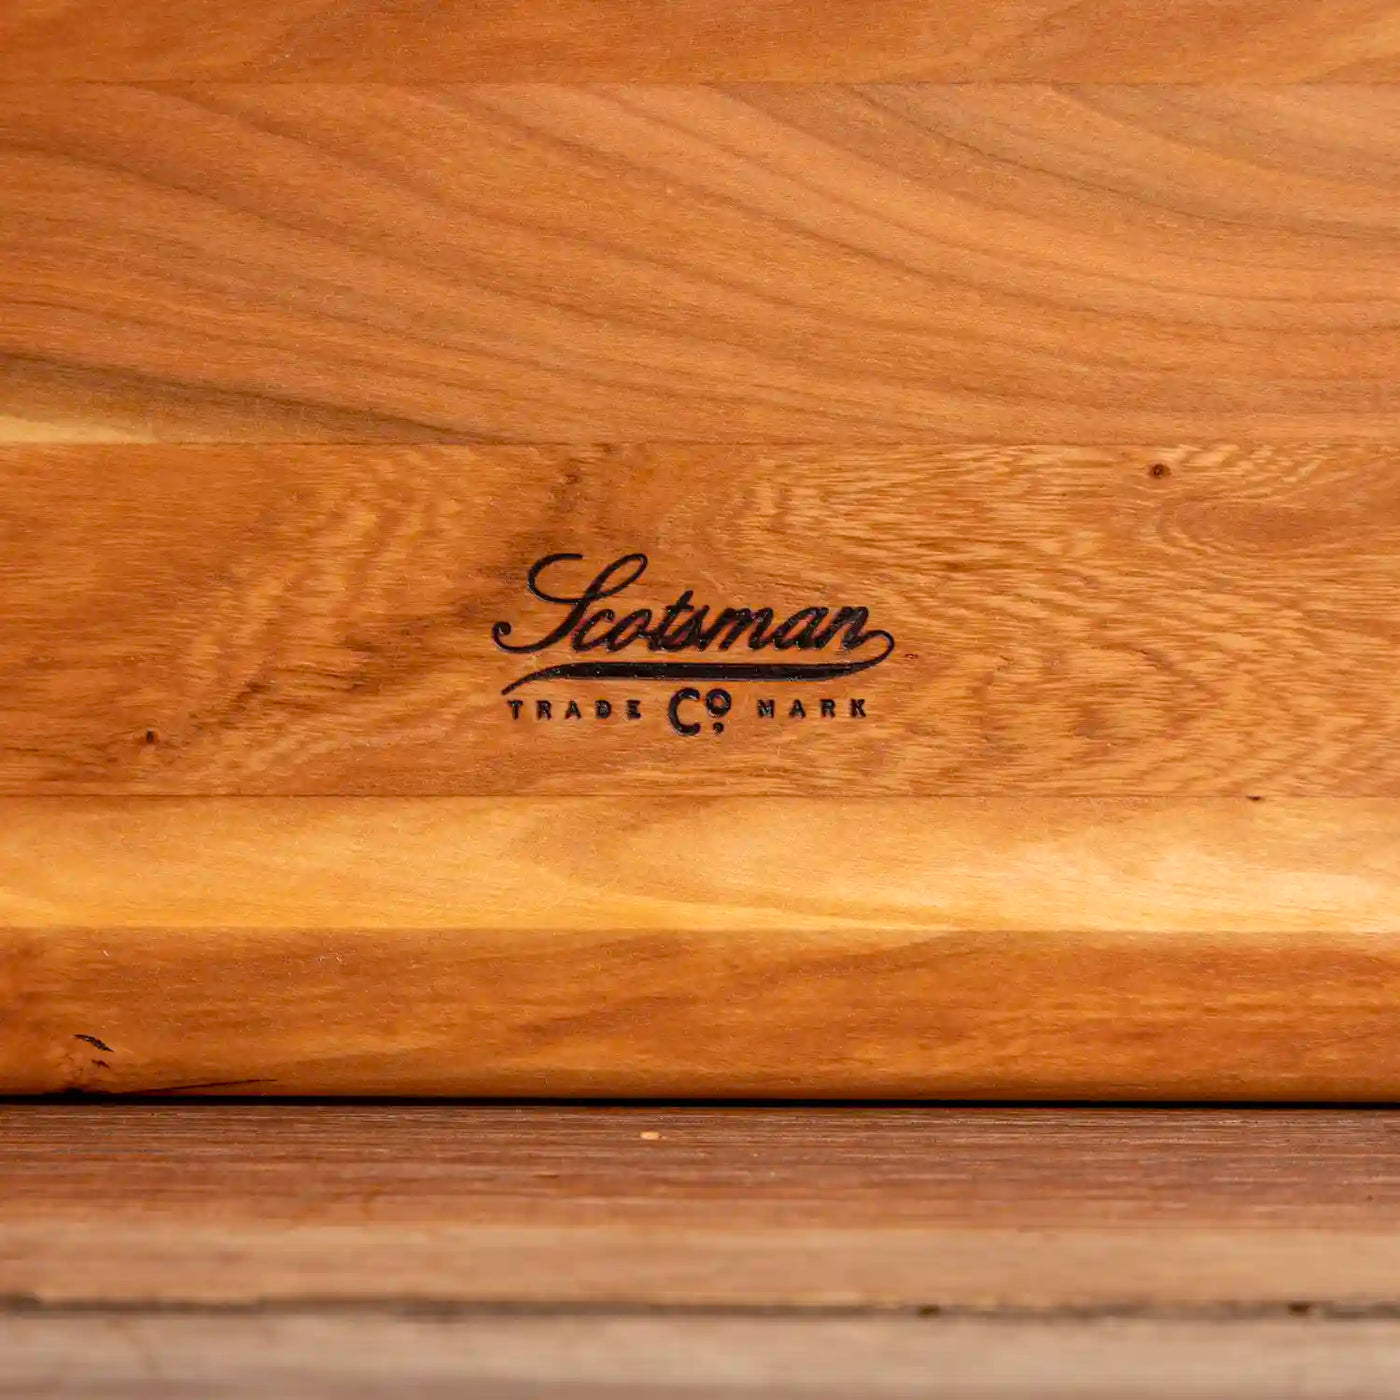 Cherry Barbecue Board with handles. Close up of Scotsman logo.